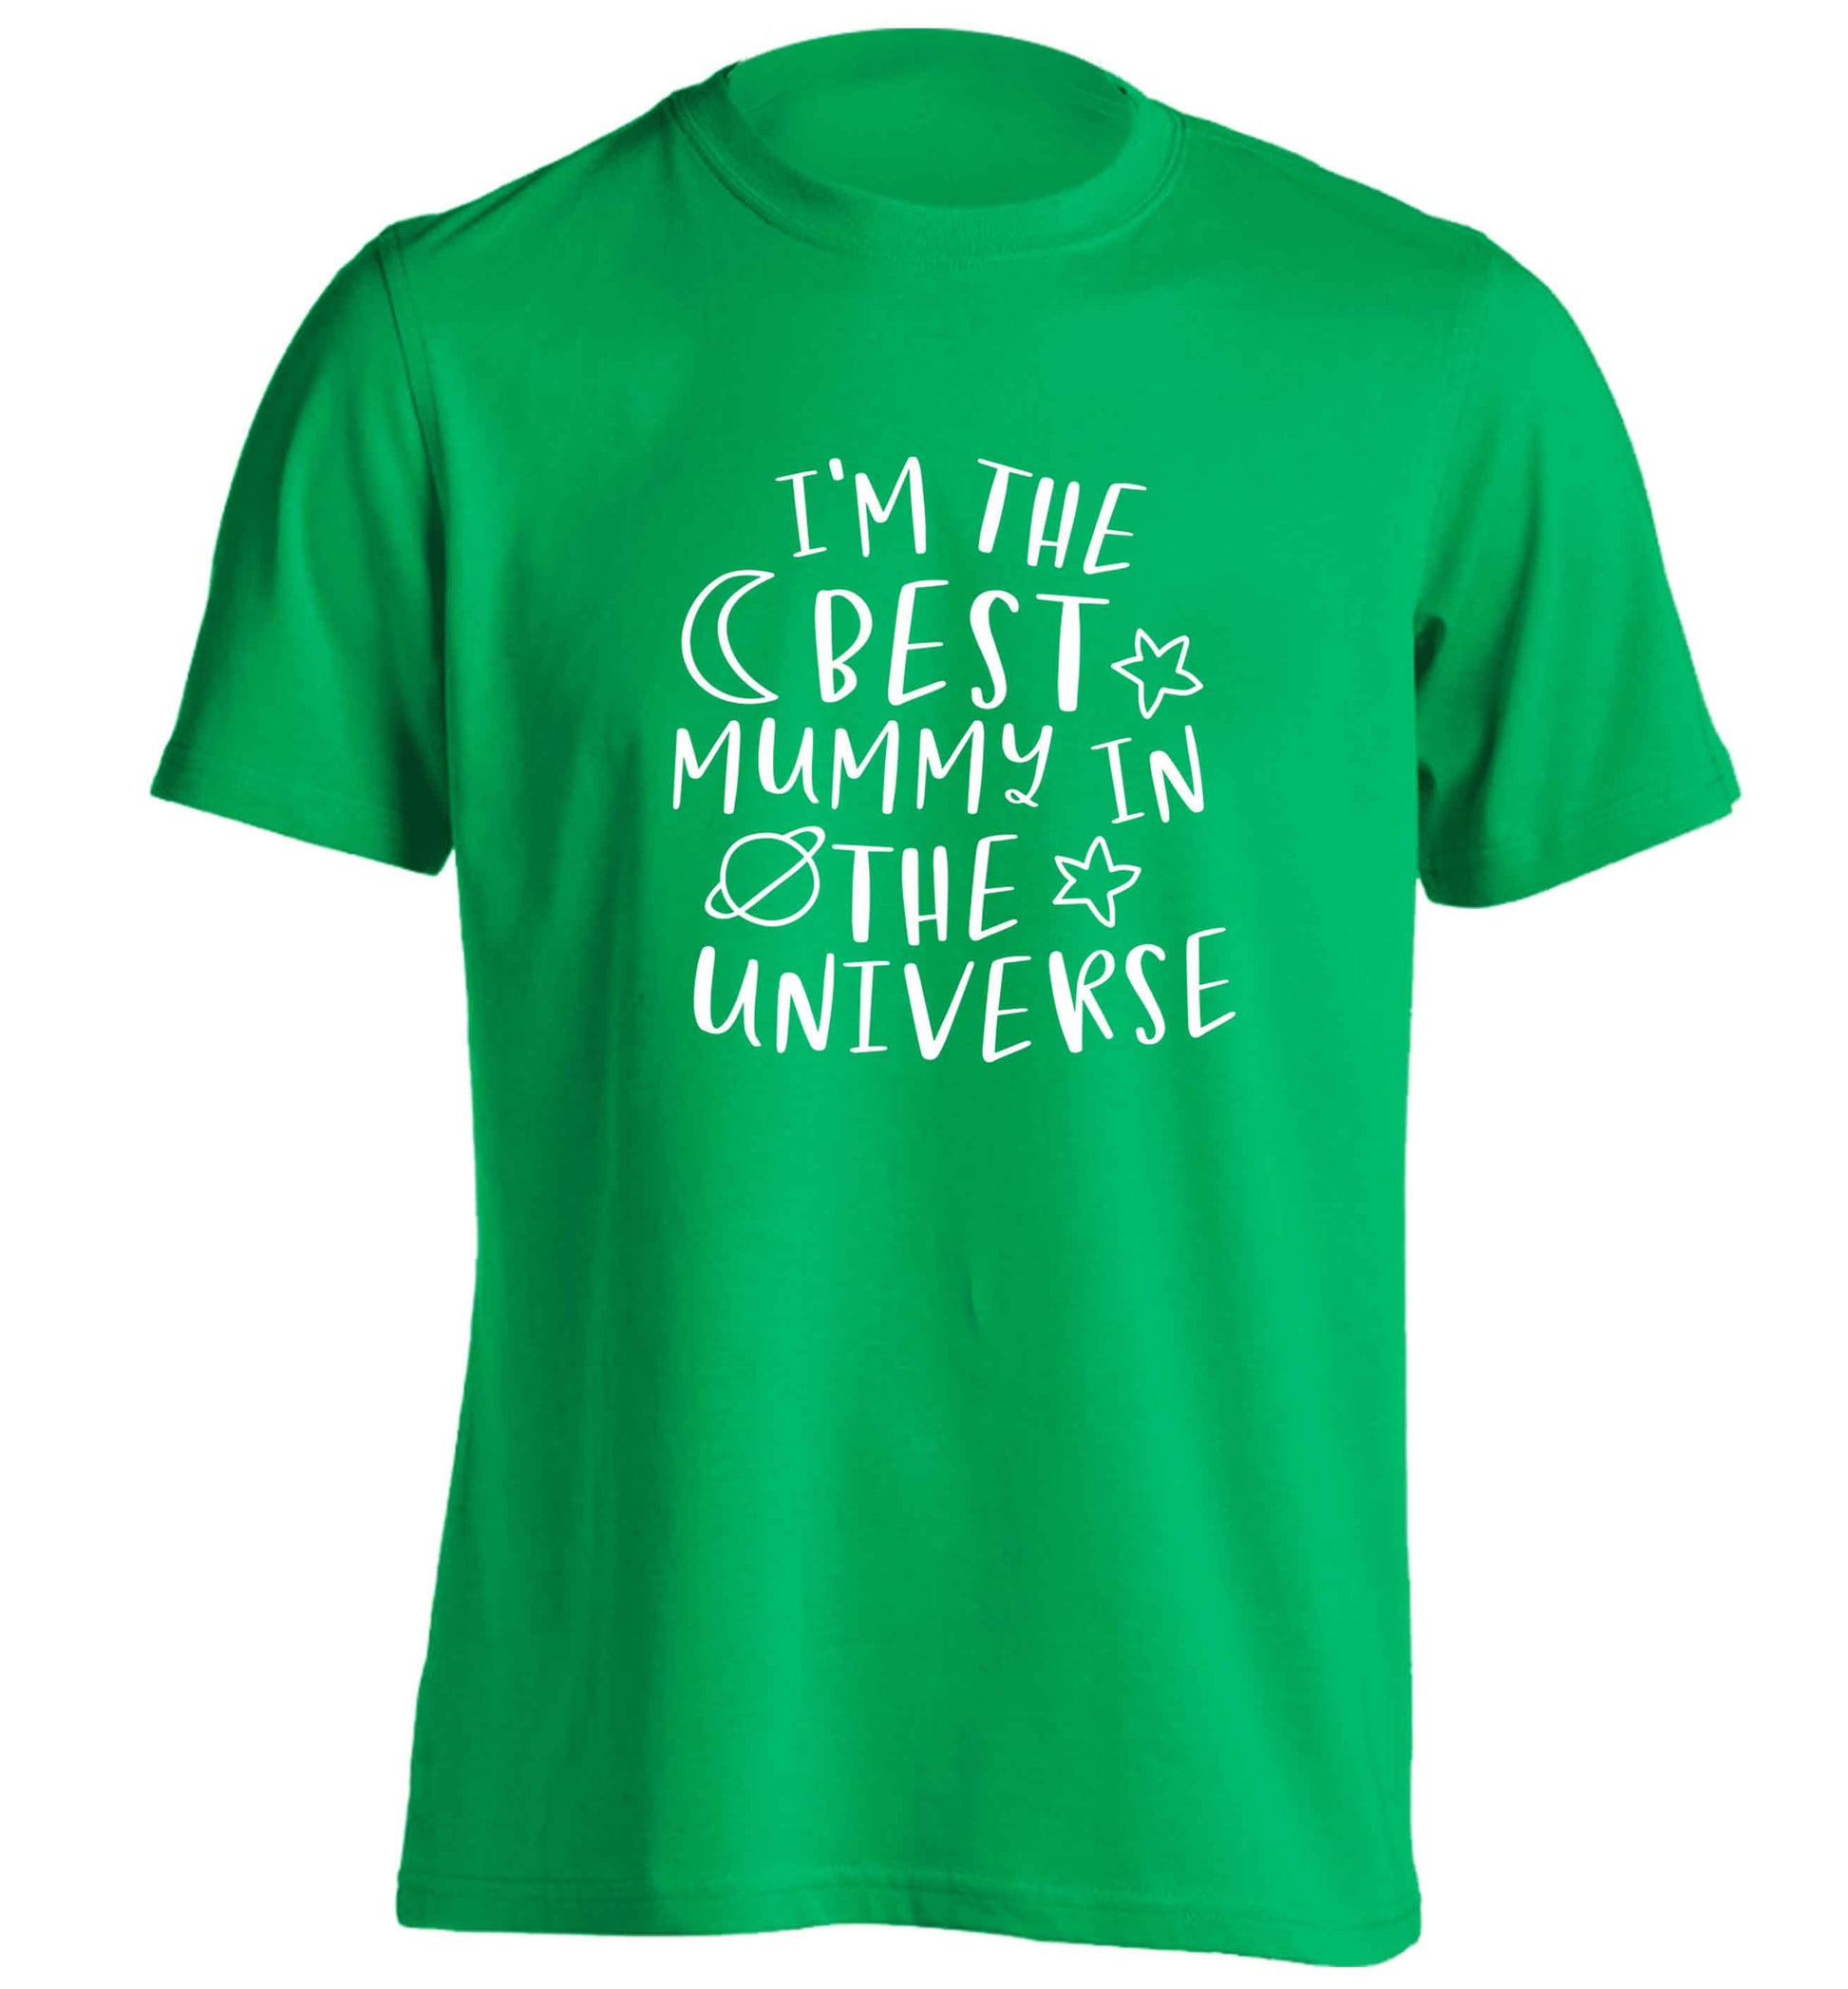 I'm the best mummy in the universe adults unisex green Tshirt 2XL